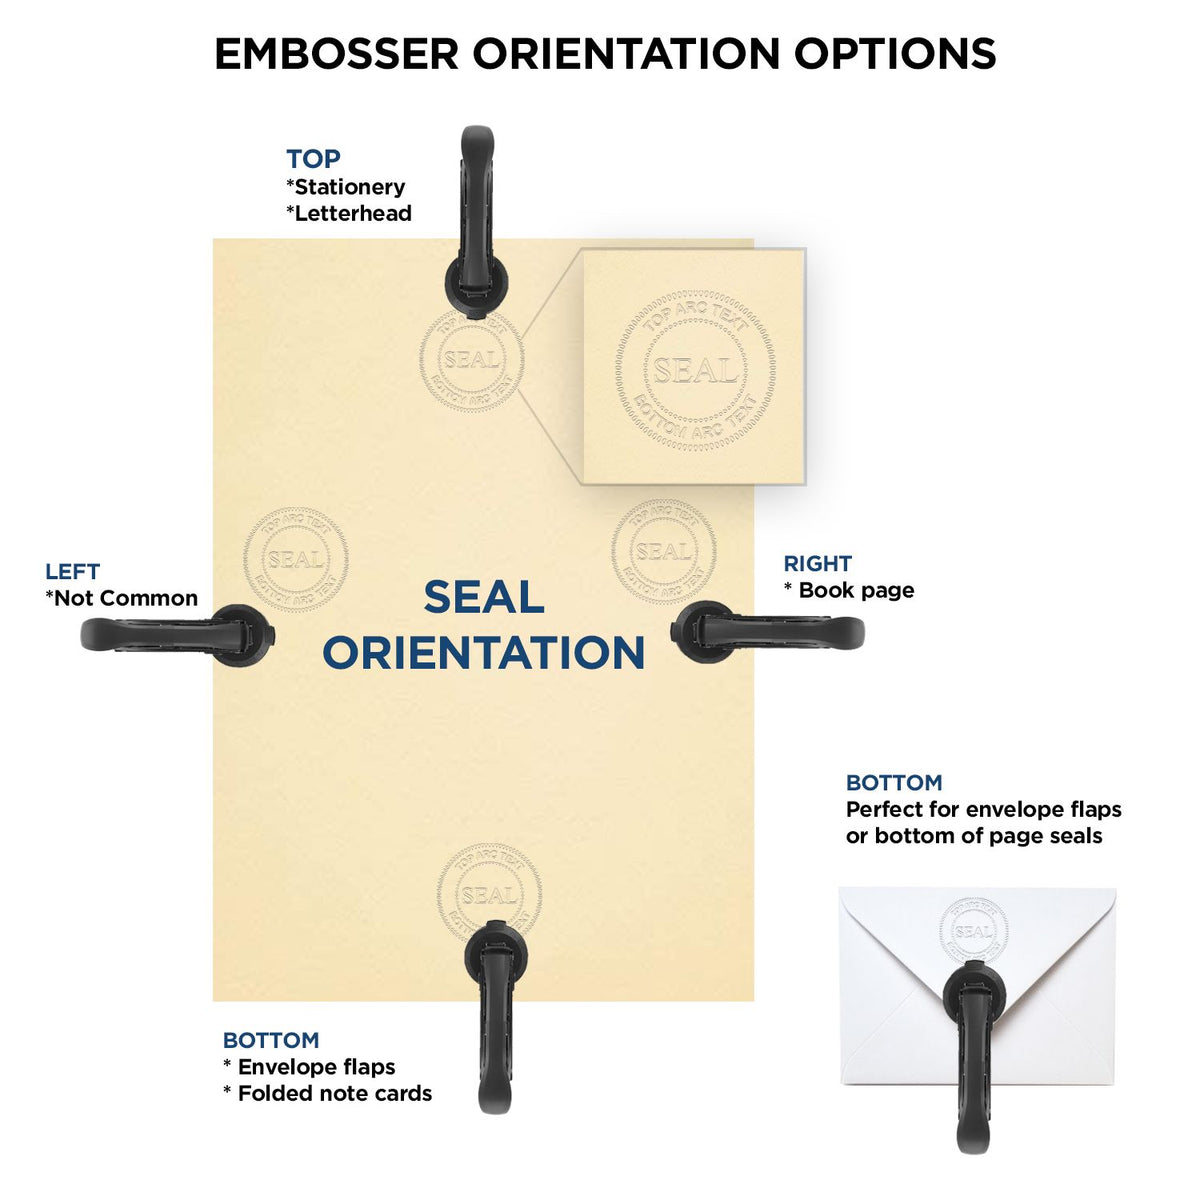 An infographic for the Handheld Guam Professional Geologist Embosser showing embosser orientation, this is showing examples of a top, bottom, right and left insert.